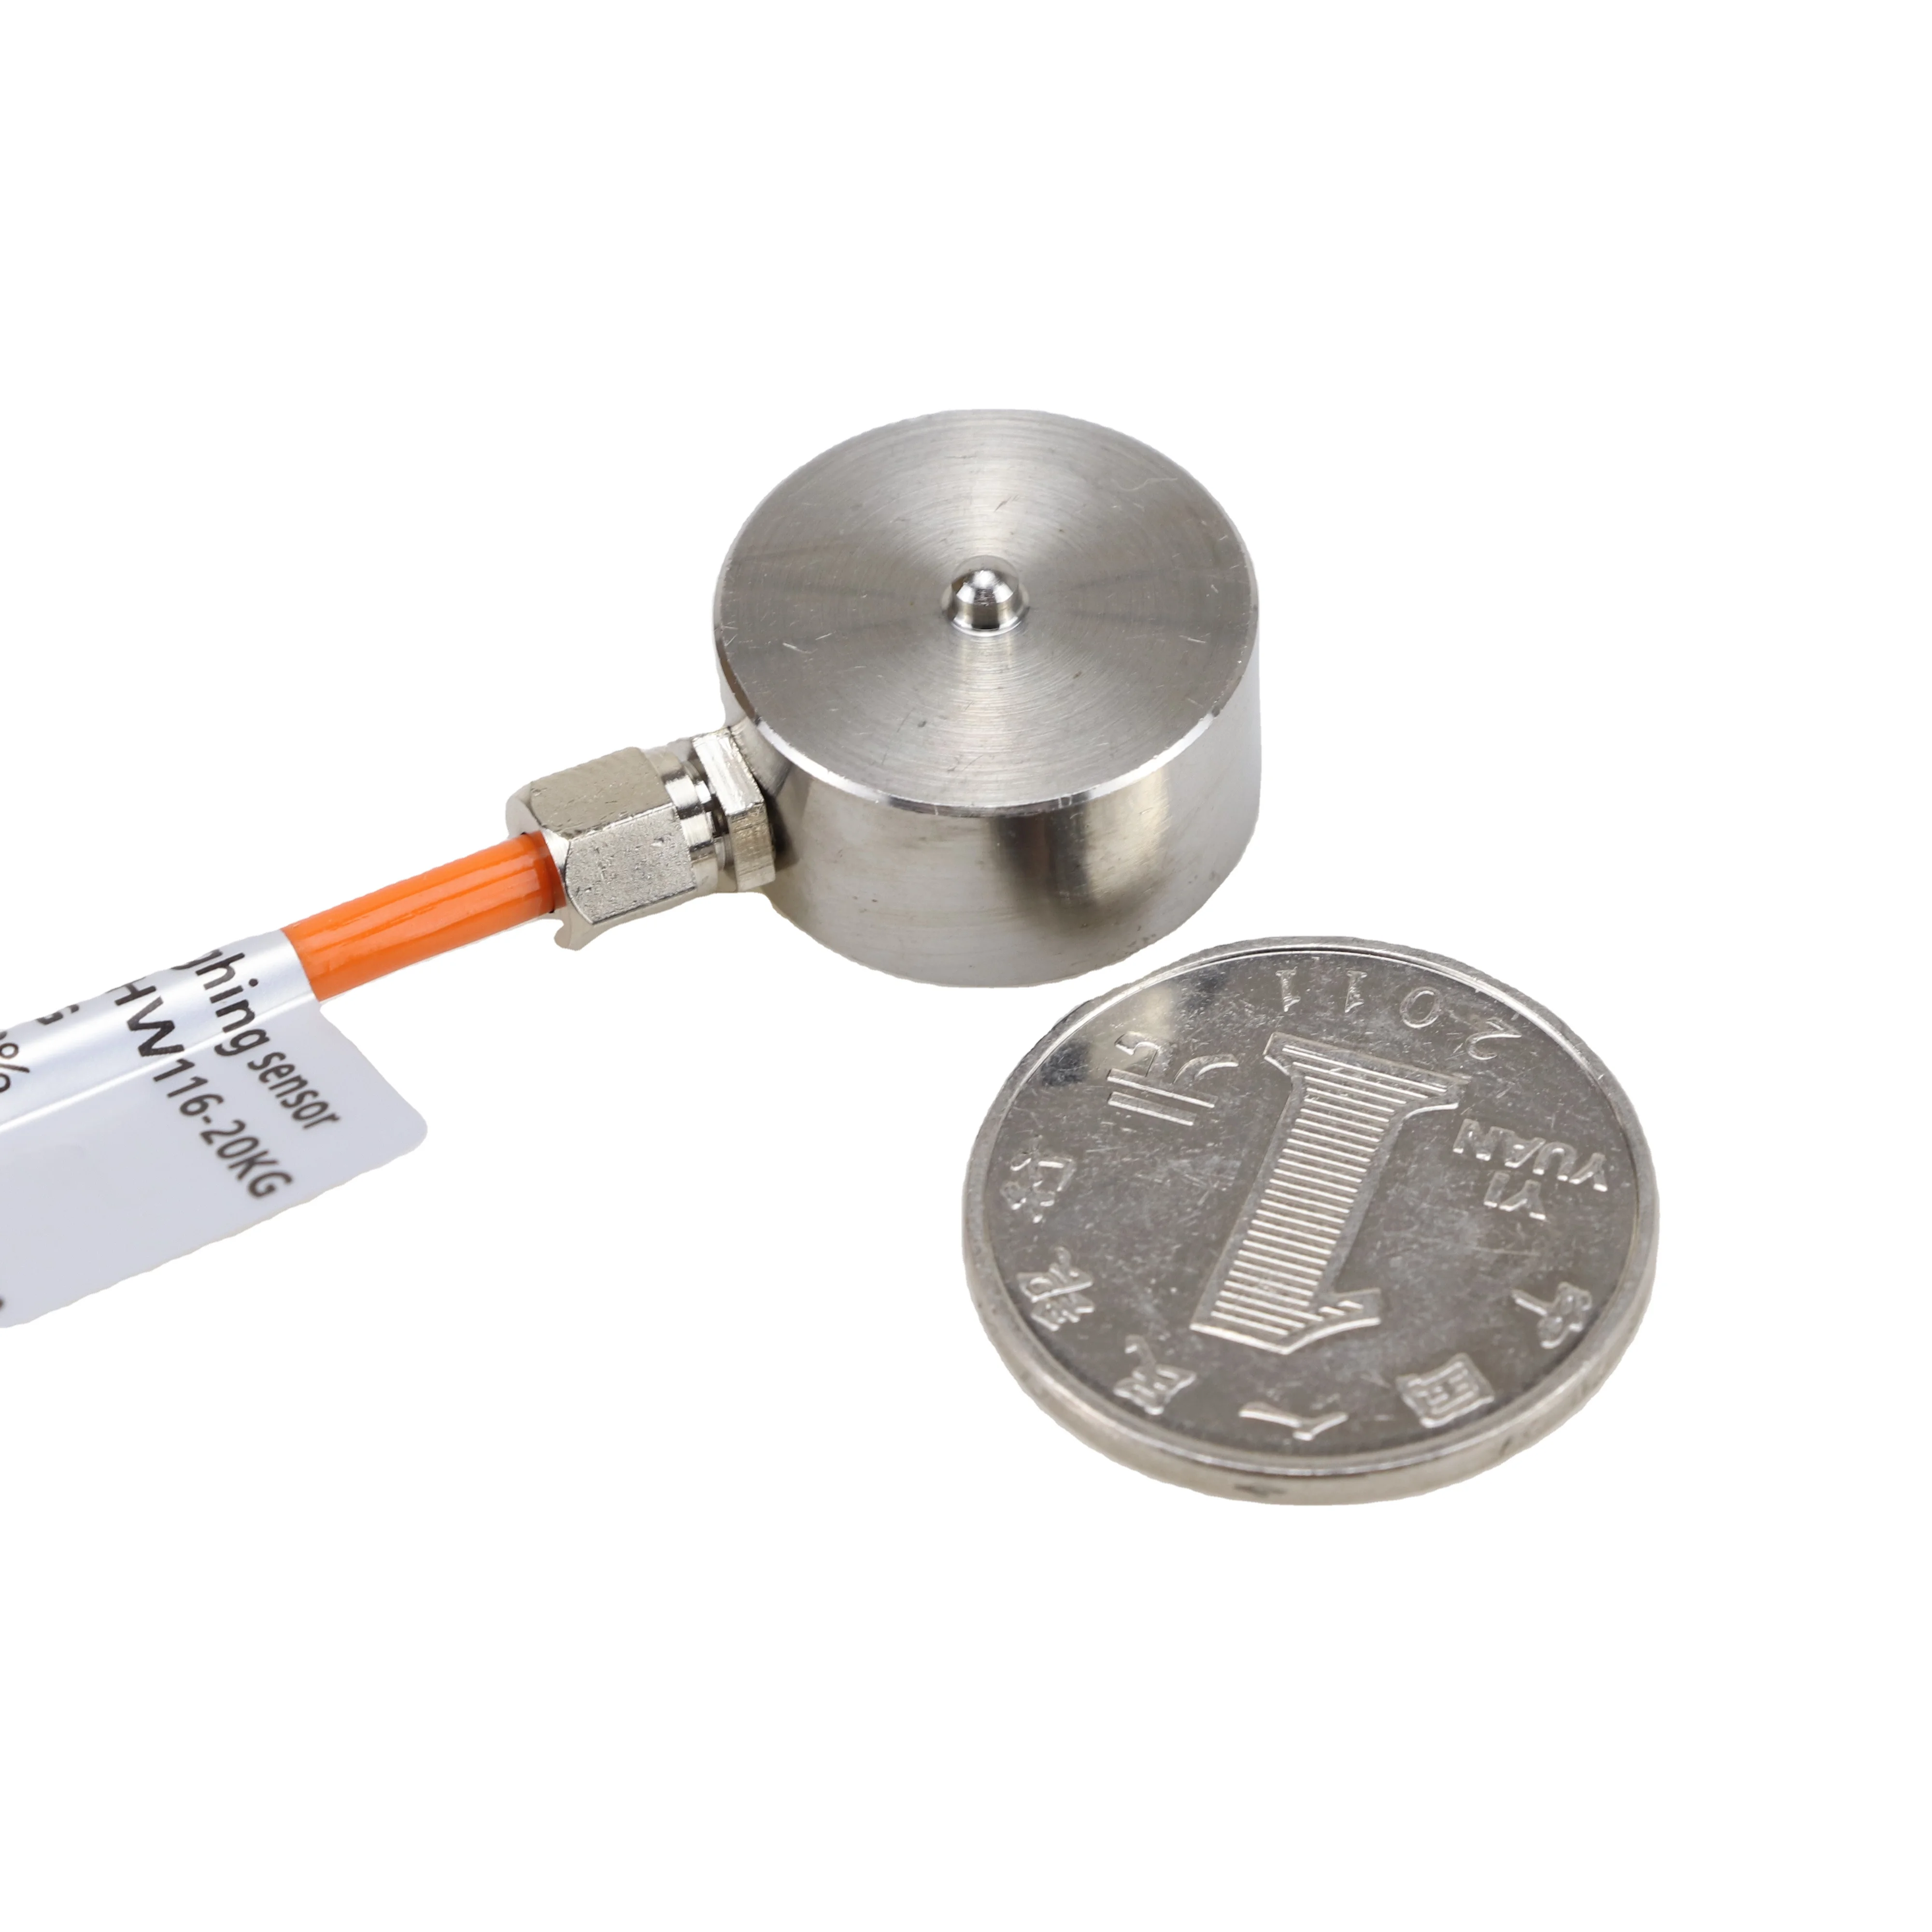 

Micro Load Cell miniature load cell Weight Sensor Robotic Robot 5KG 10KG 20kg 30kg 50kg 100kg 200kg 300kg 500kg 1T 2T 3T 5T